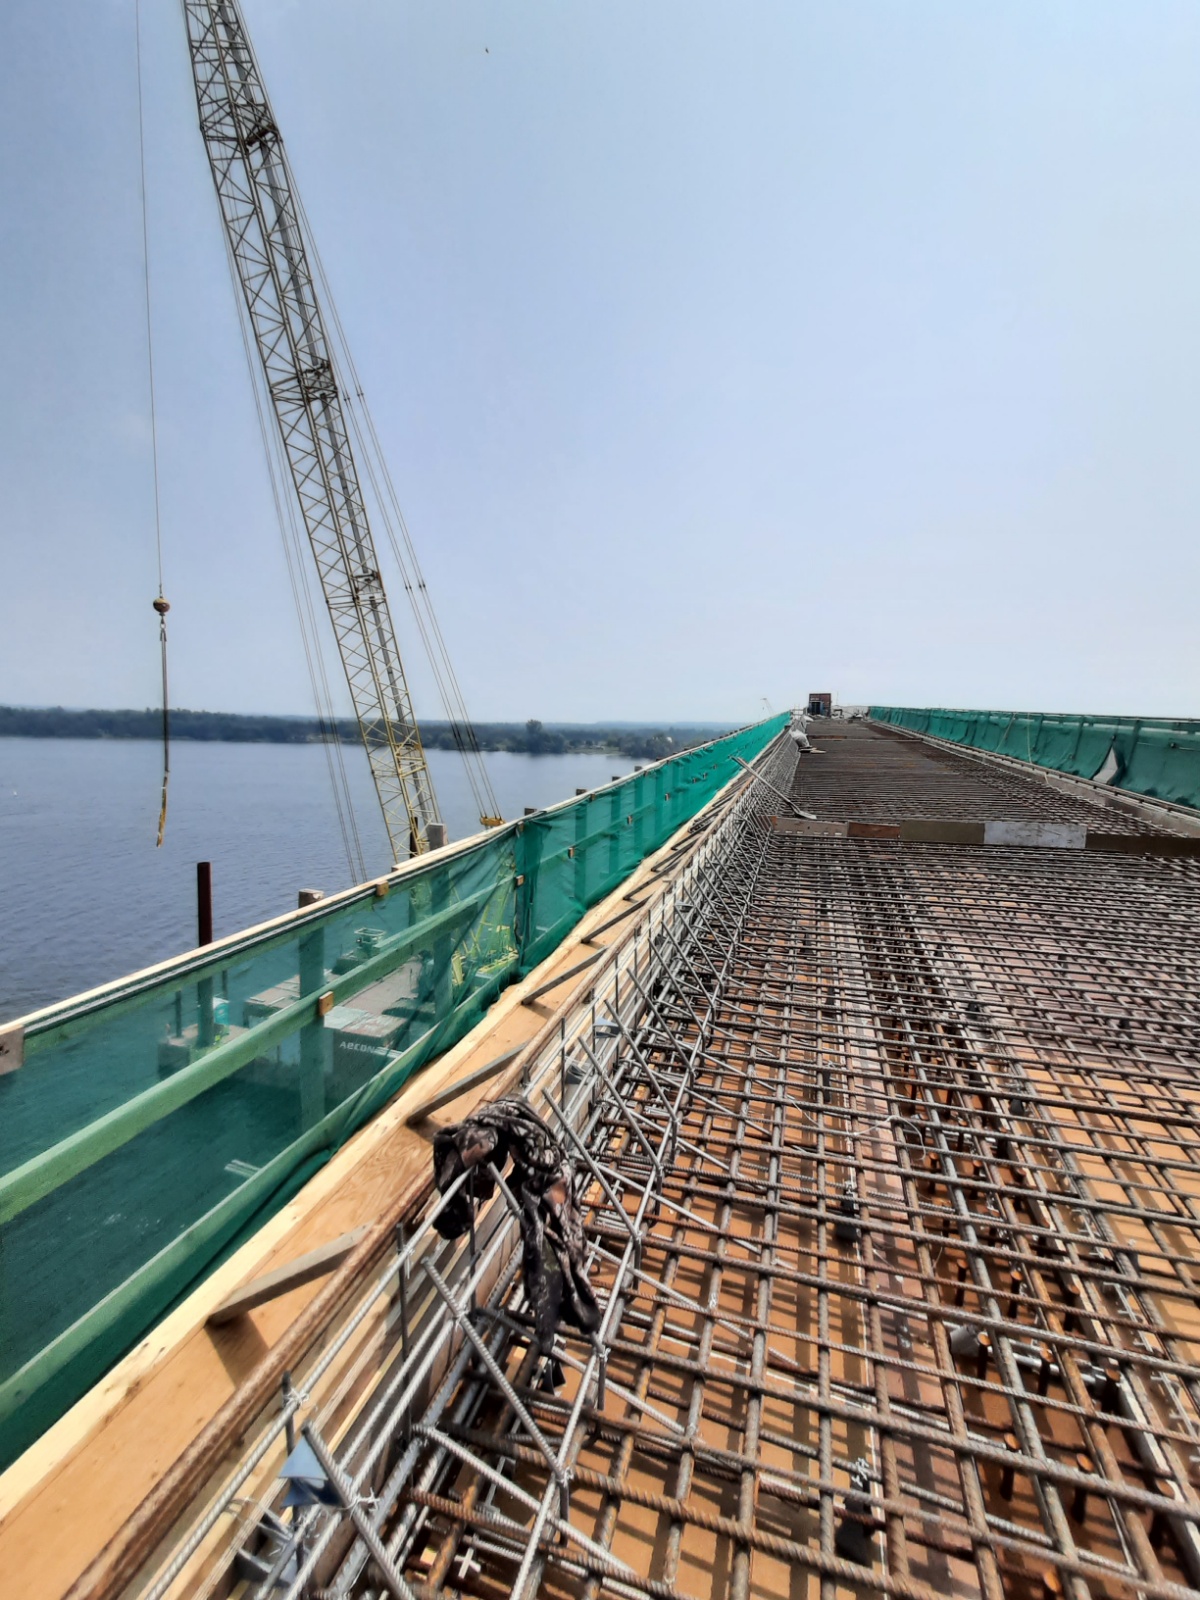 View south, deck rebar and formwork